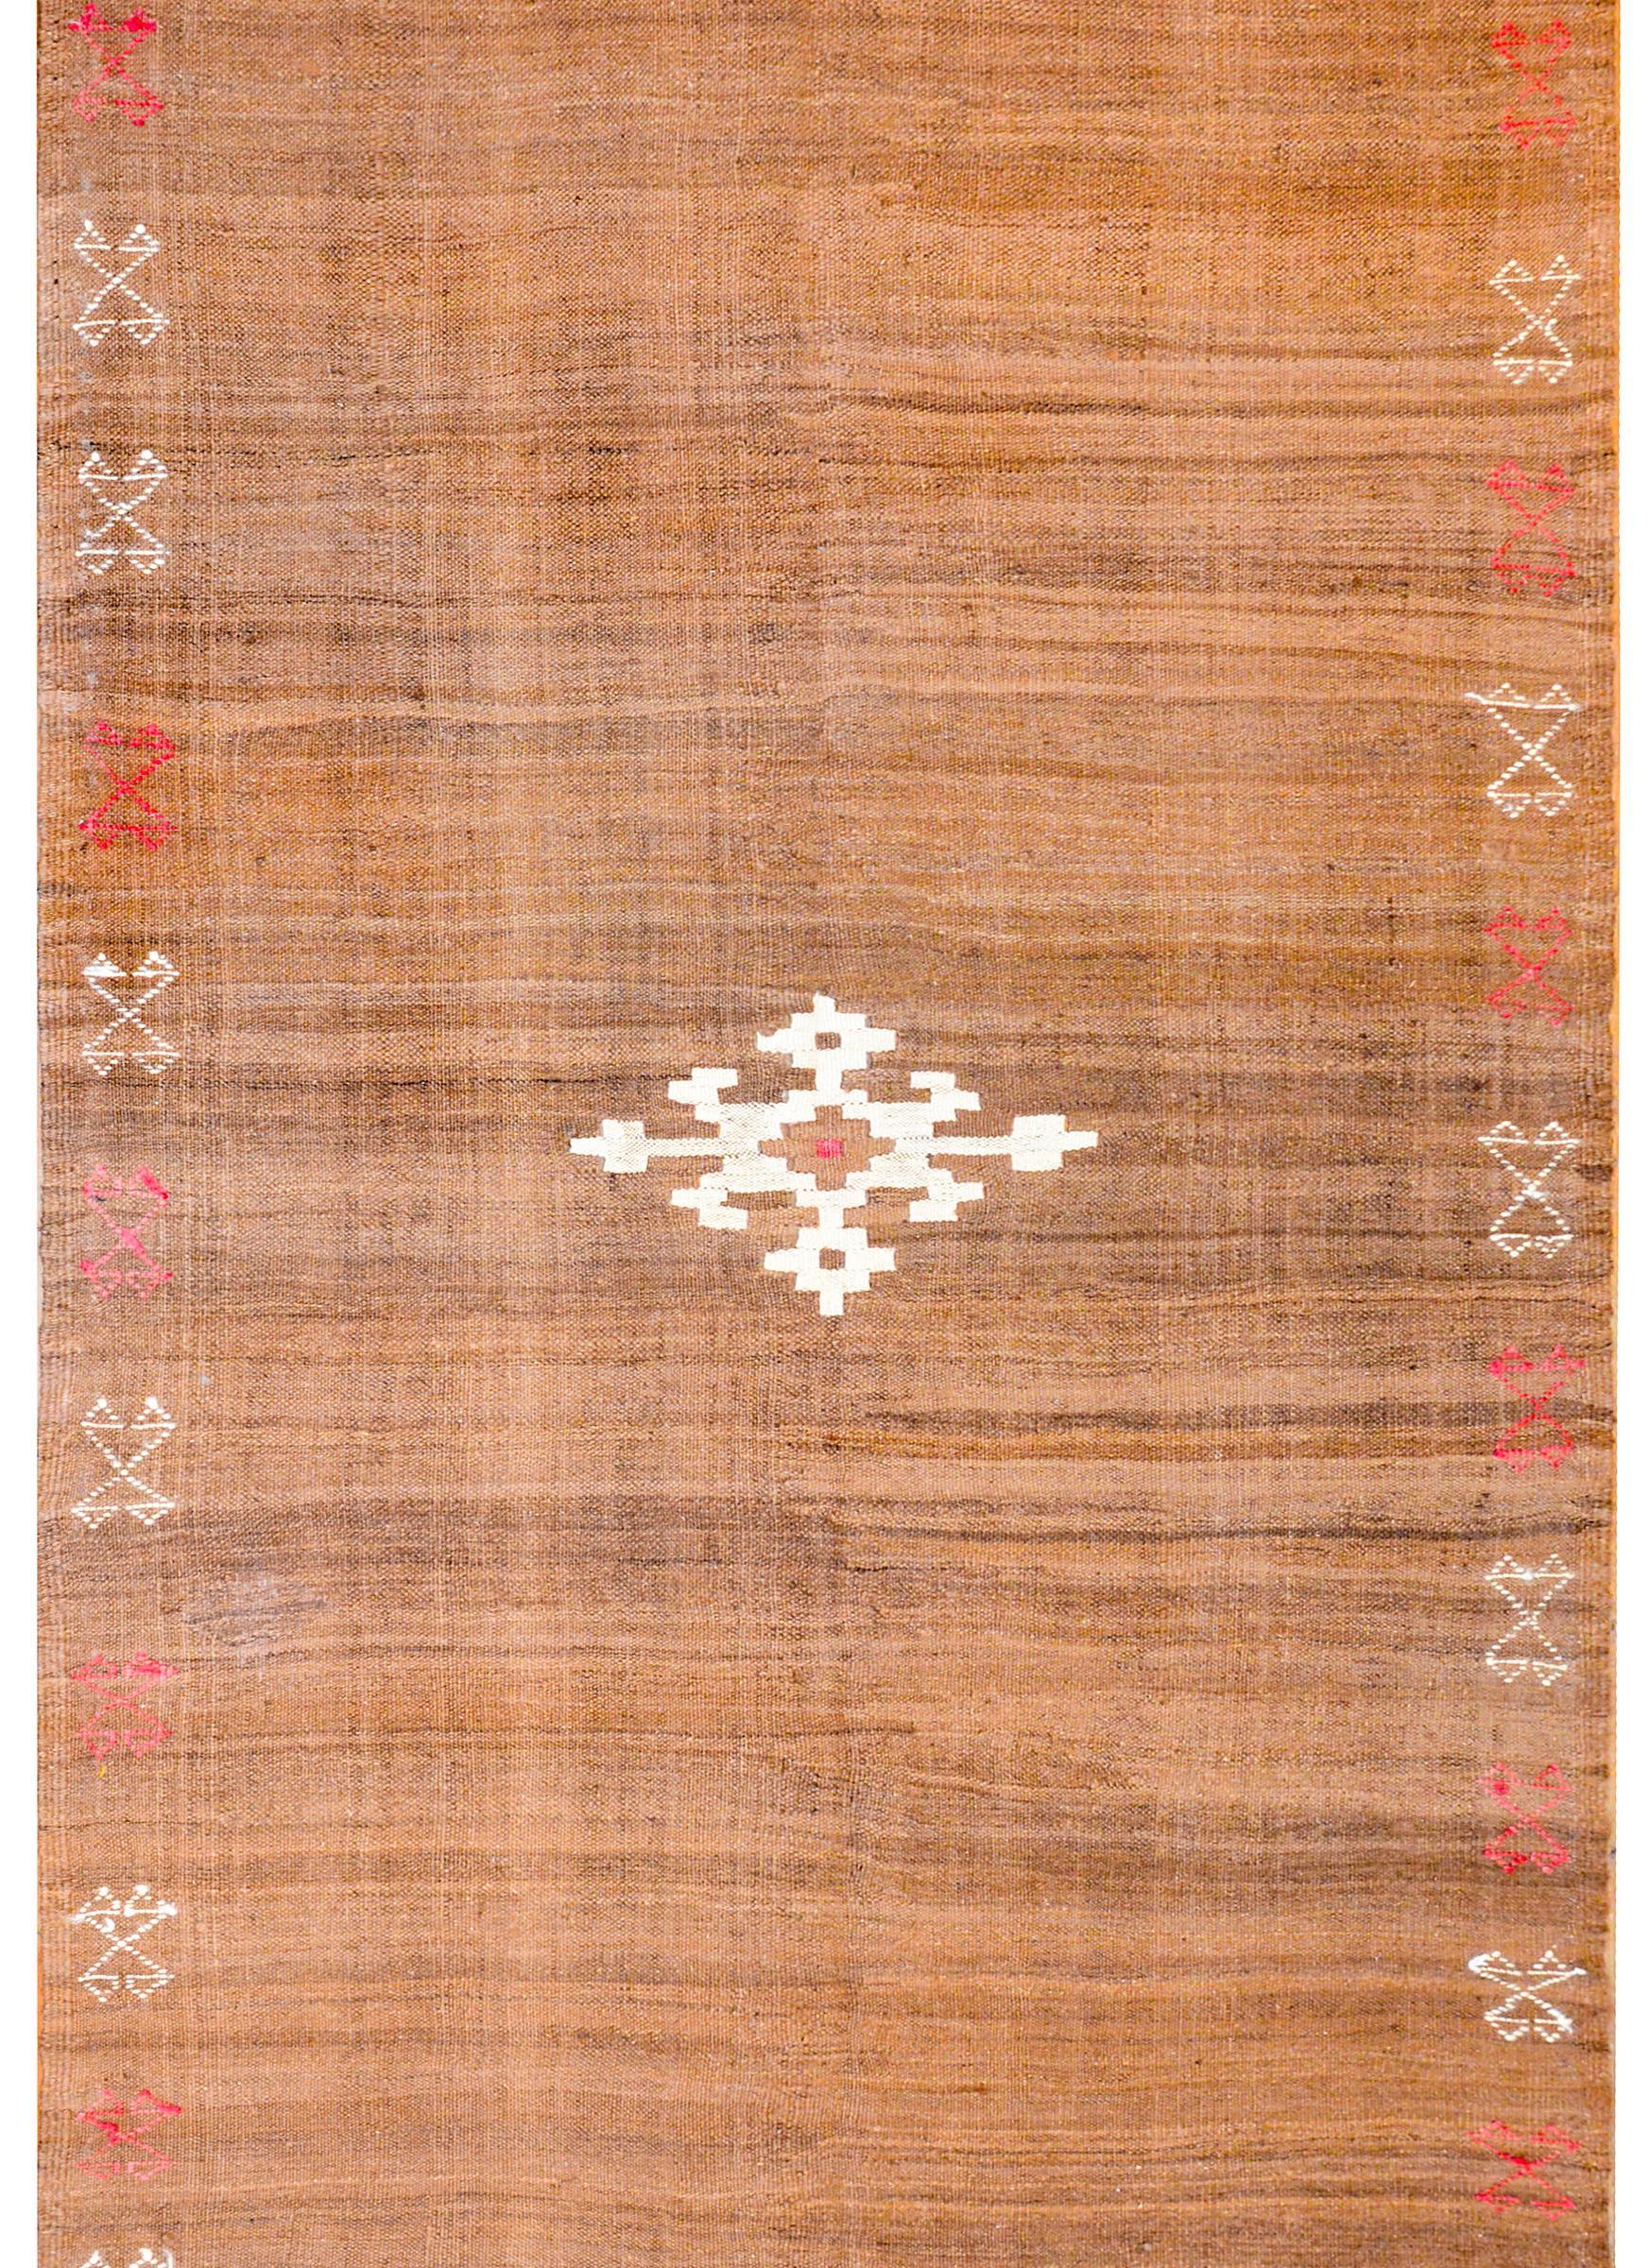 A wonderful early 20th century Persian Shahsavan Kilim rug with a simle, but beautiful, field woven in natural undyed wool with varying shades of brown. A geometric-styled diamond medallion lives in the centre, and alternating crimson and white